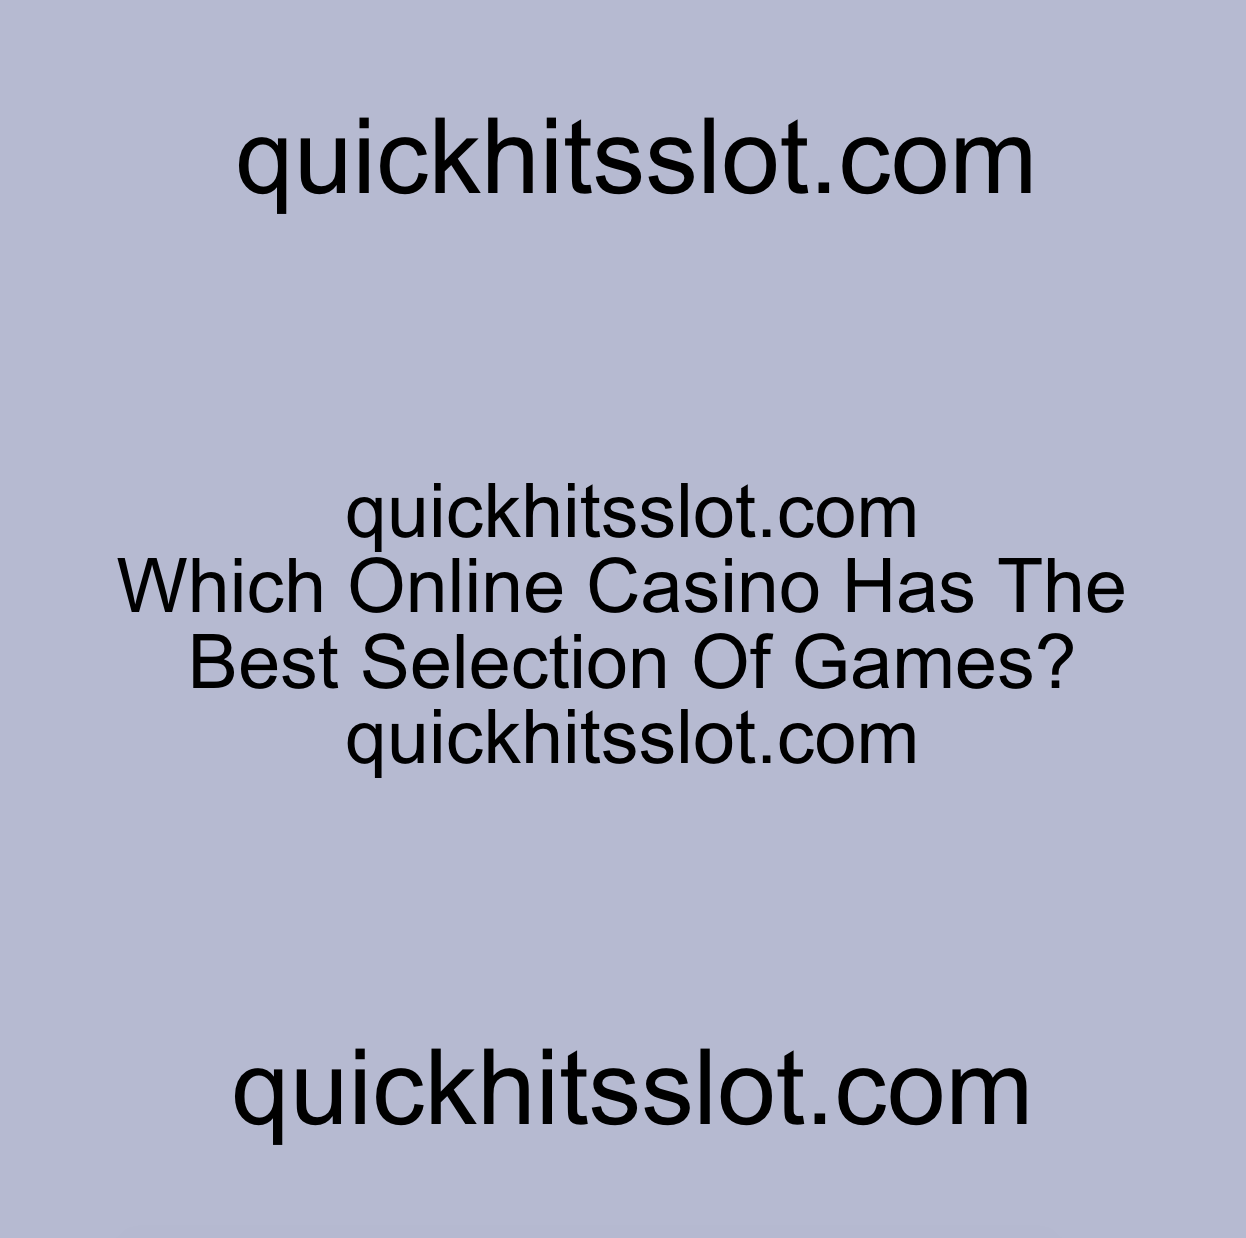 Which Online Casino Has The Best Selection Of Games? quickhitsslot.com